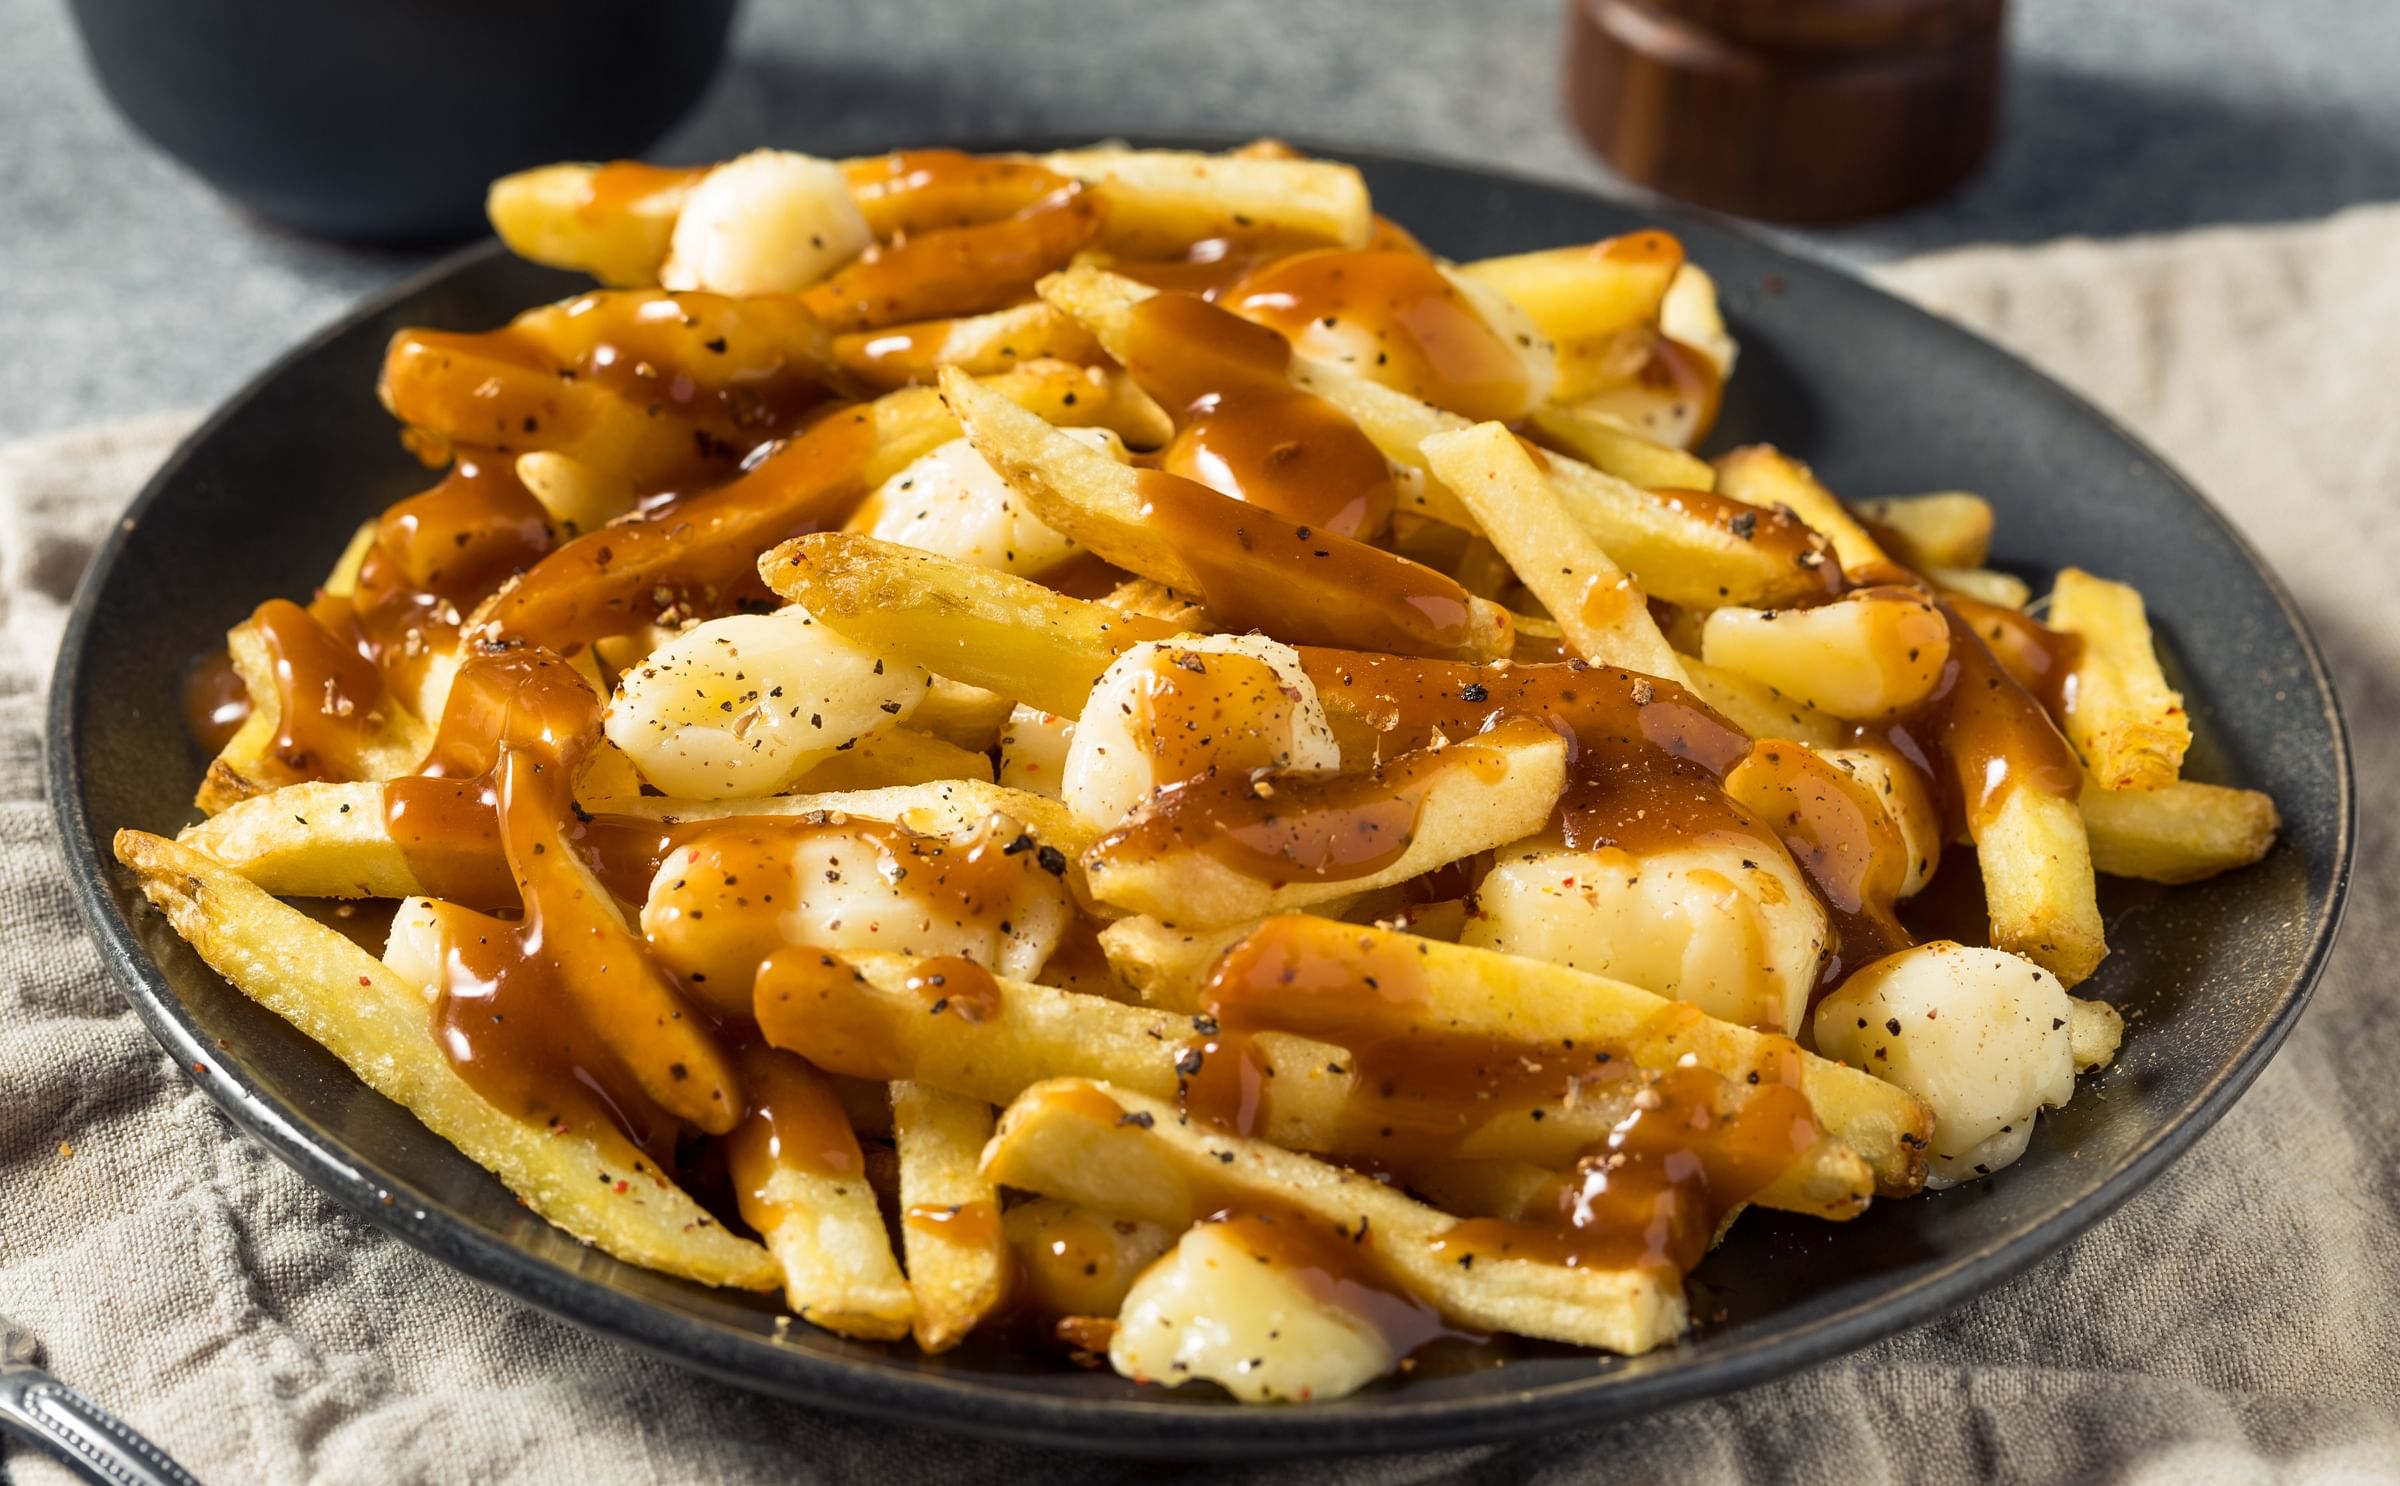 Where to Eat Canada's Most Iconic French Fries-Based Dish Poutine? A ...